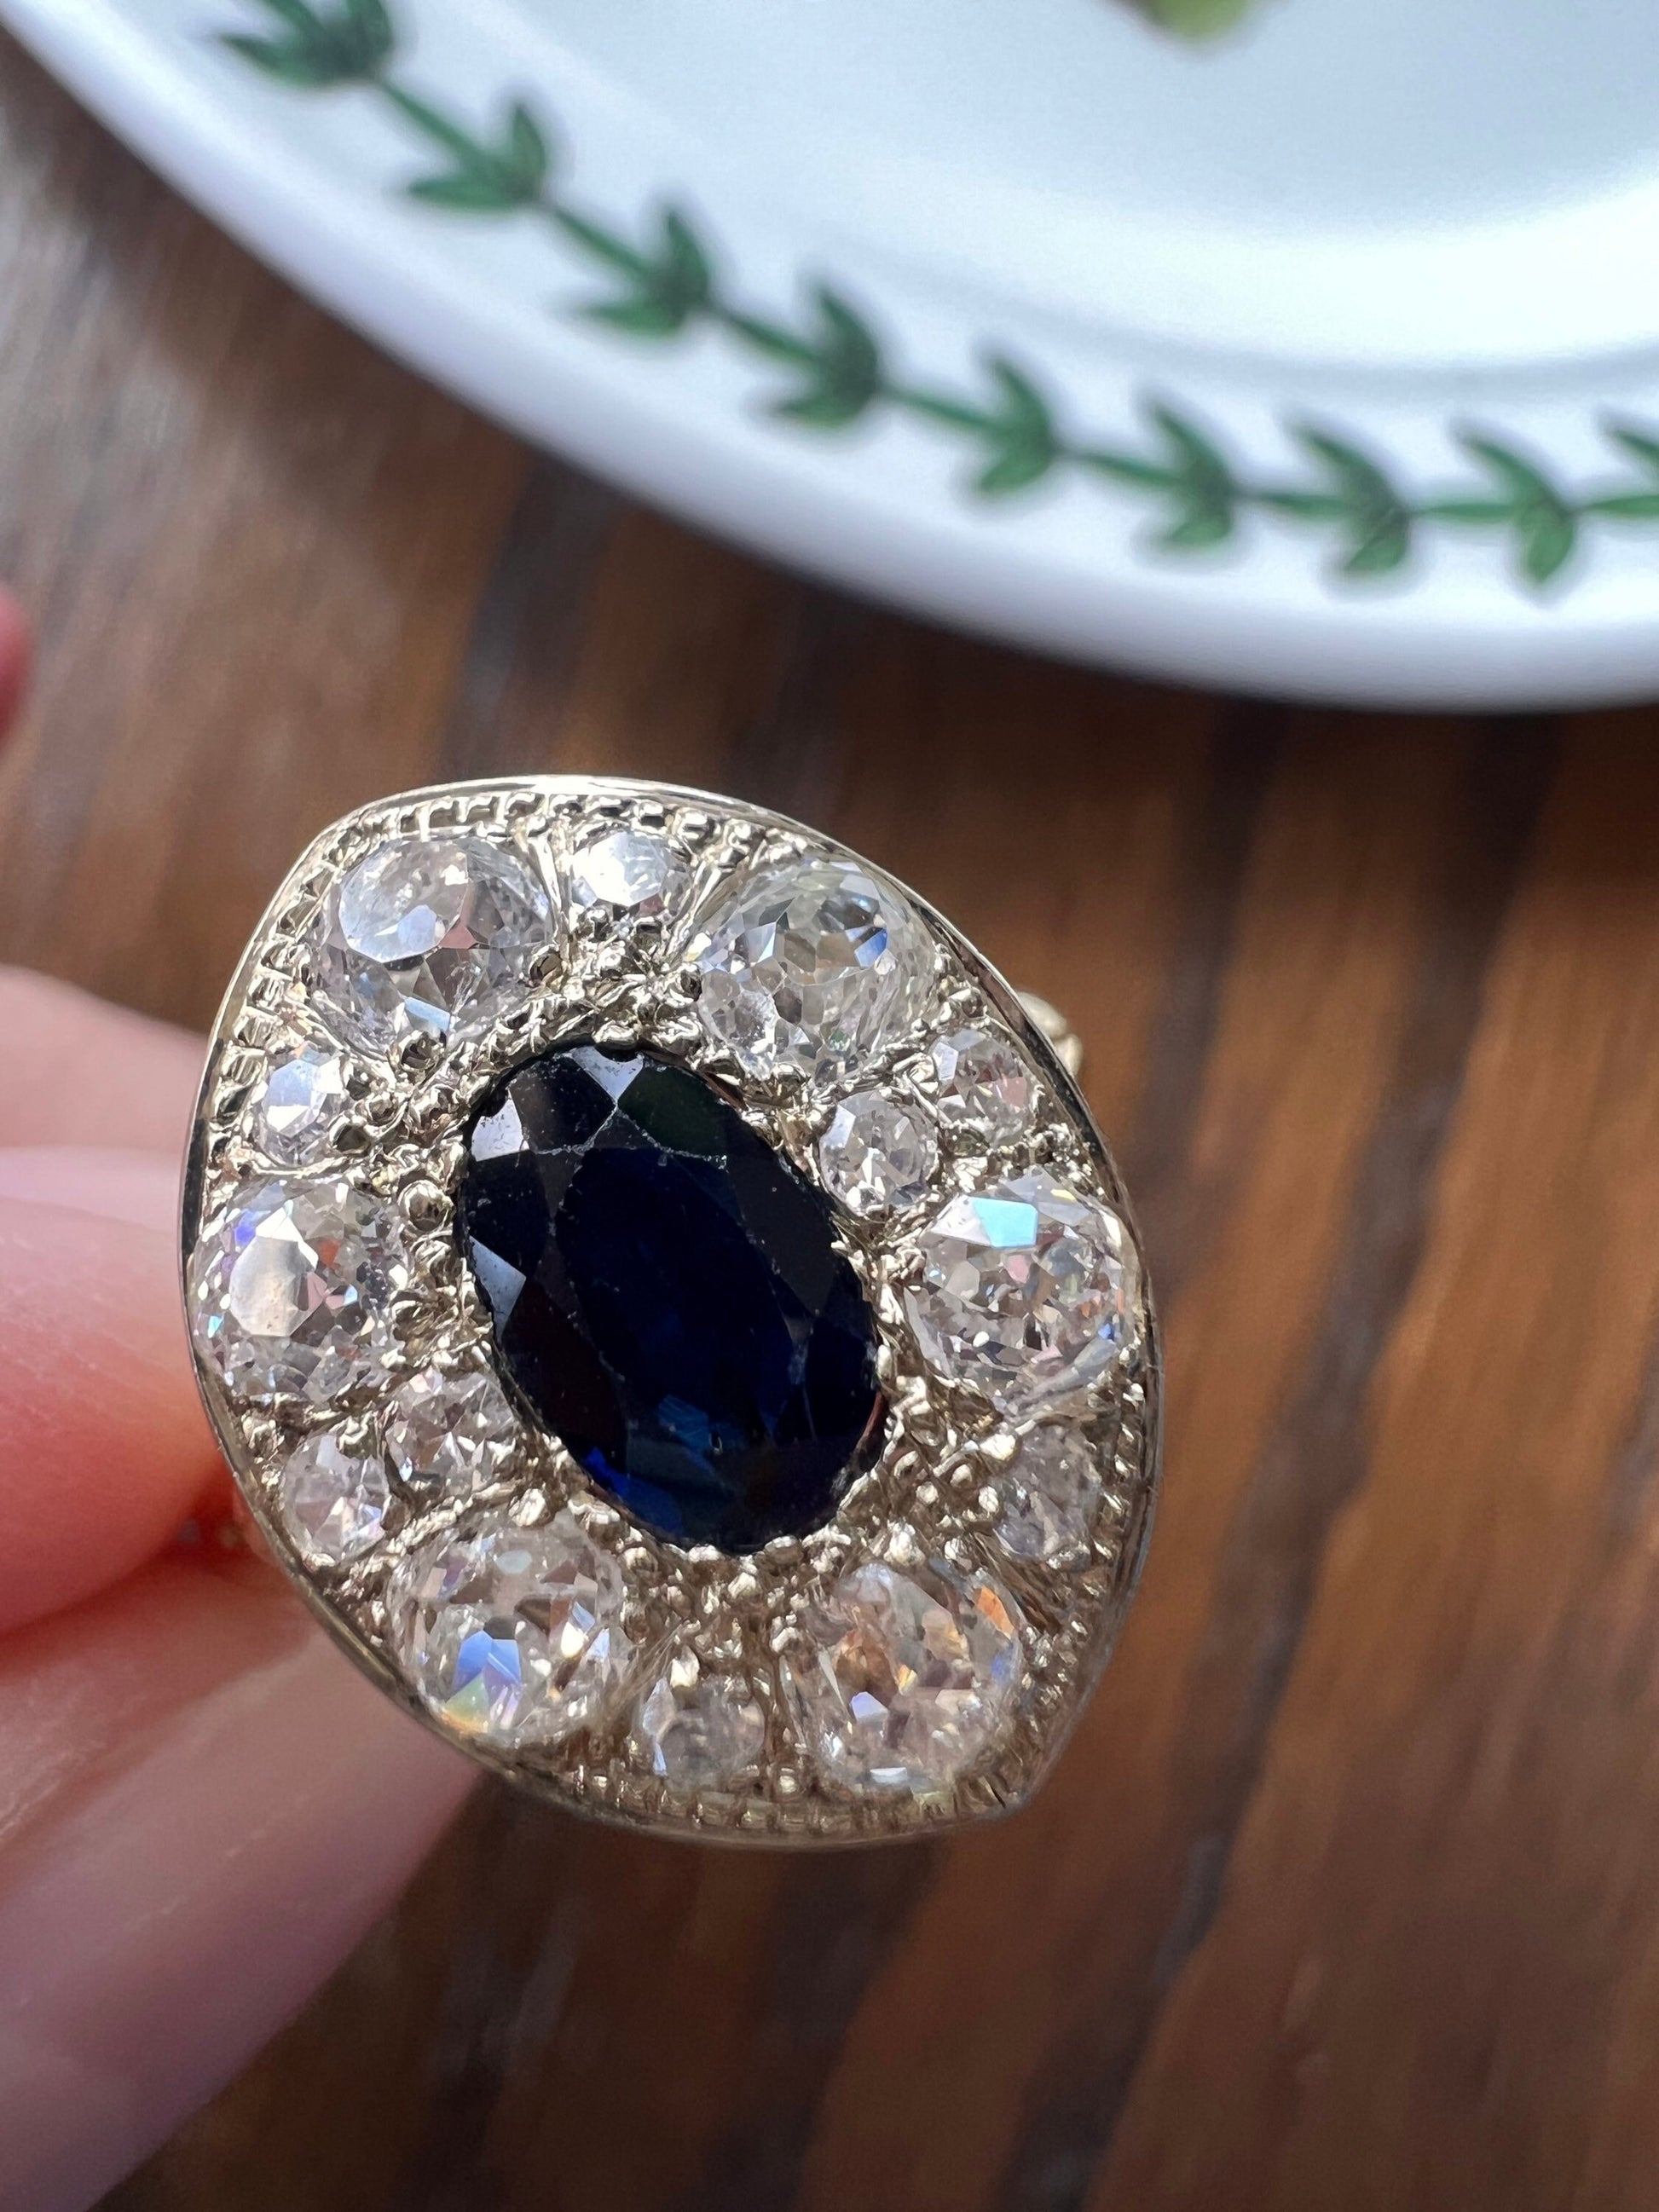 Chunky 1.5Ctw. Old Mine Cut DIAMOND Halo 1 Ct. Natural SAPPHIRE Ring French Antique 18k Gold Romantic Gift Belle Epoque Blue 1 1/2 Carat OMC